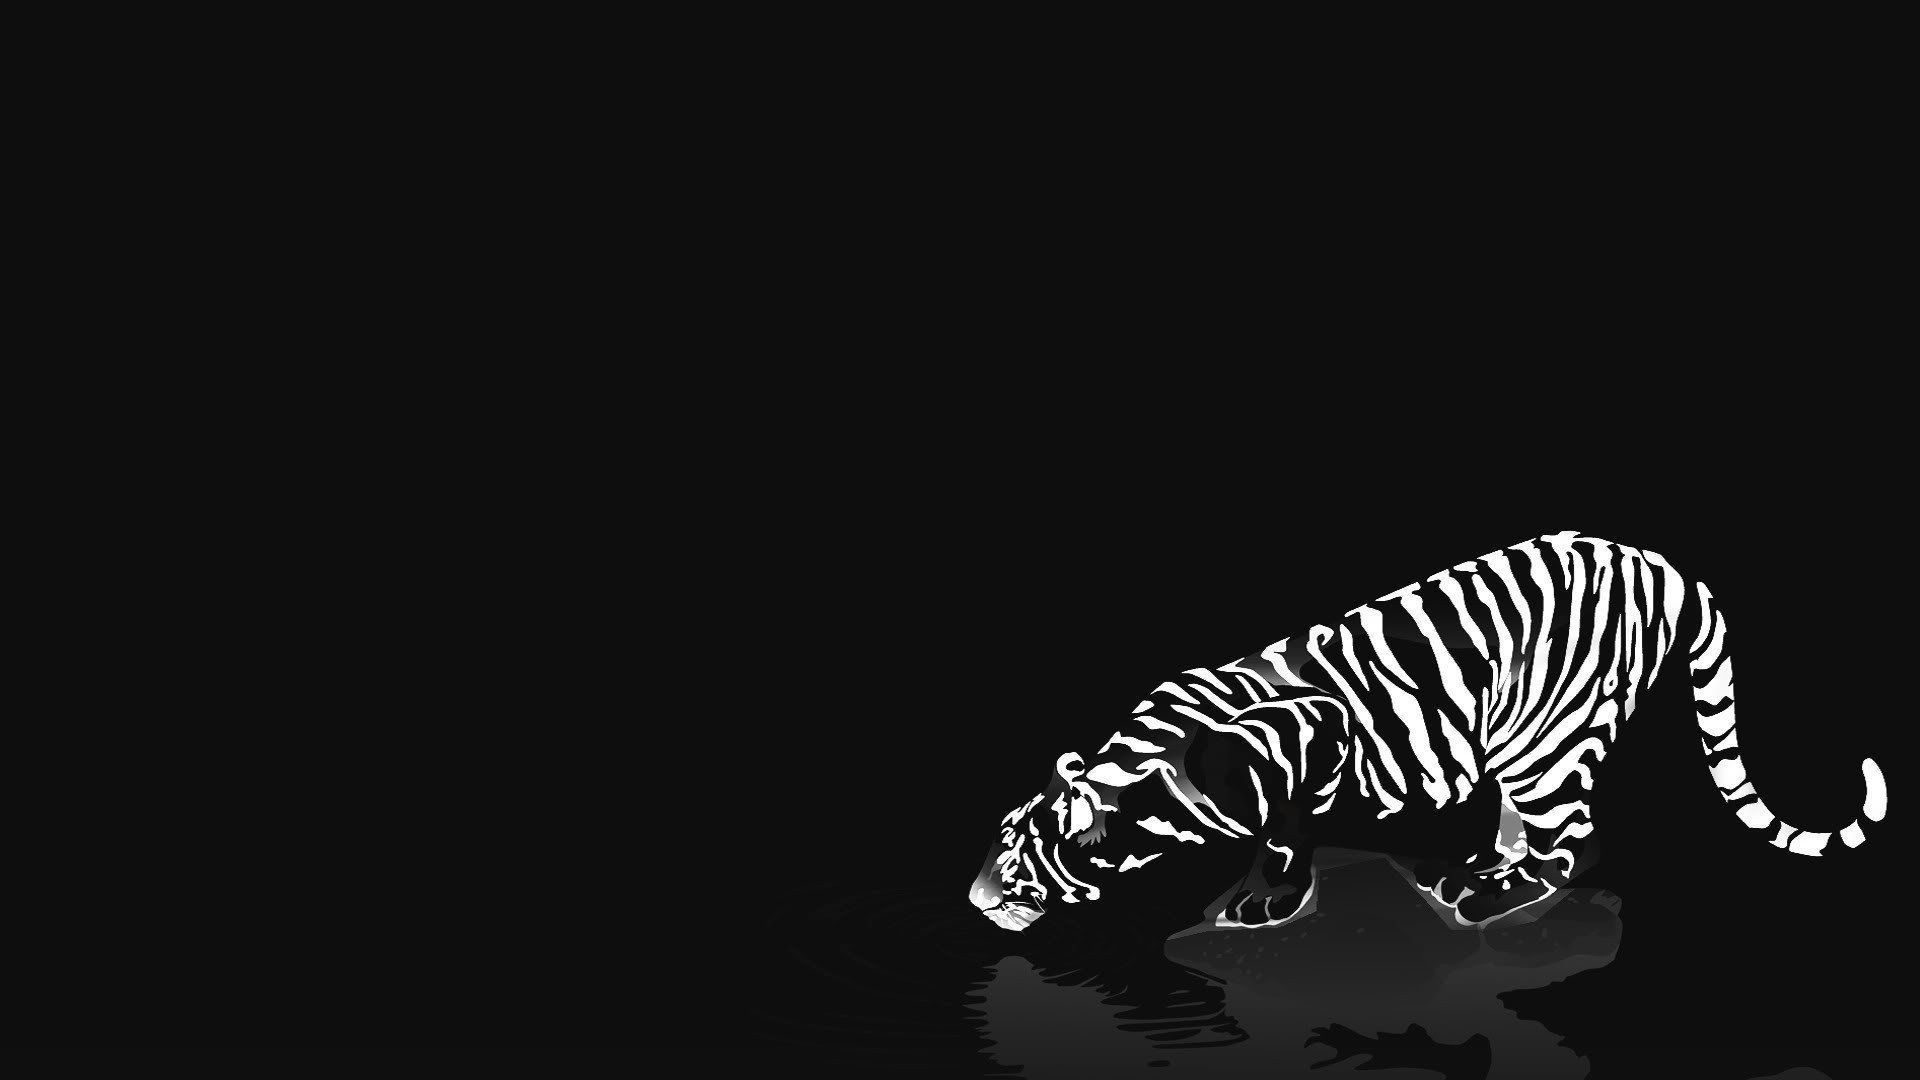 Cats animals tigers white tiger reflections black background